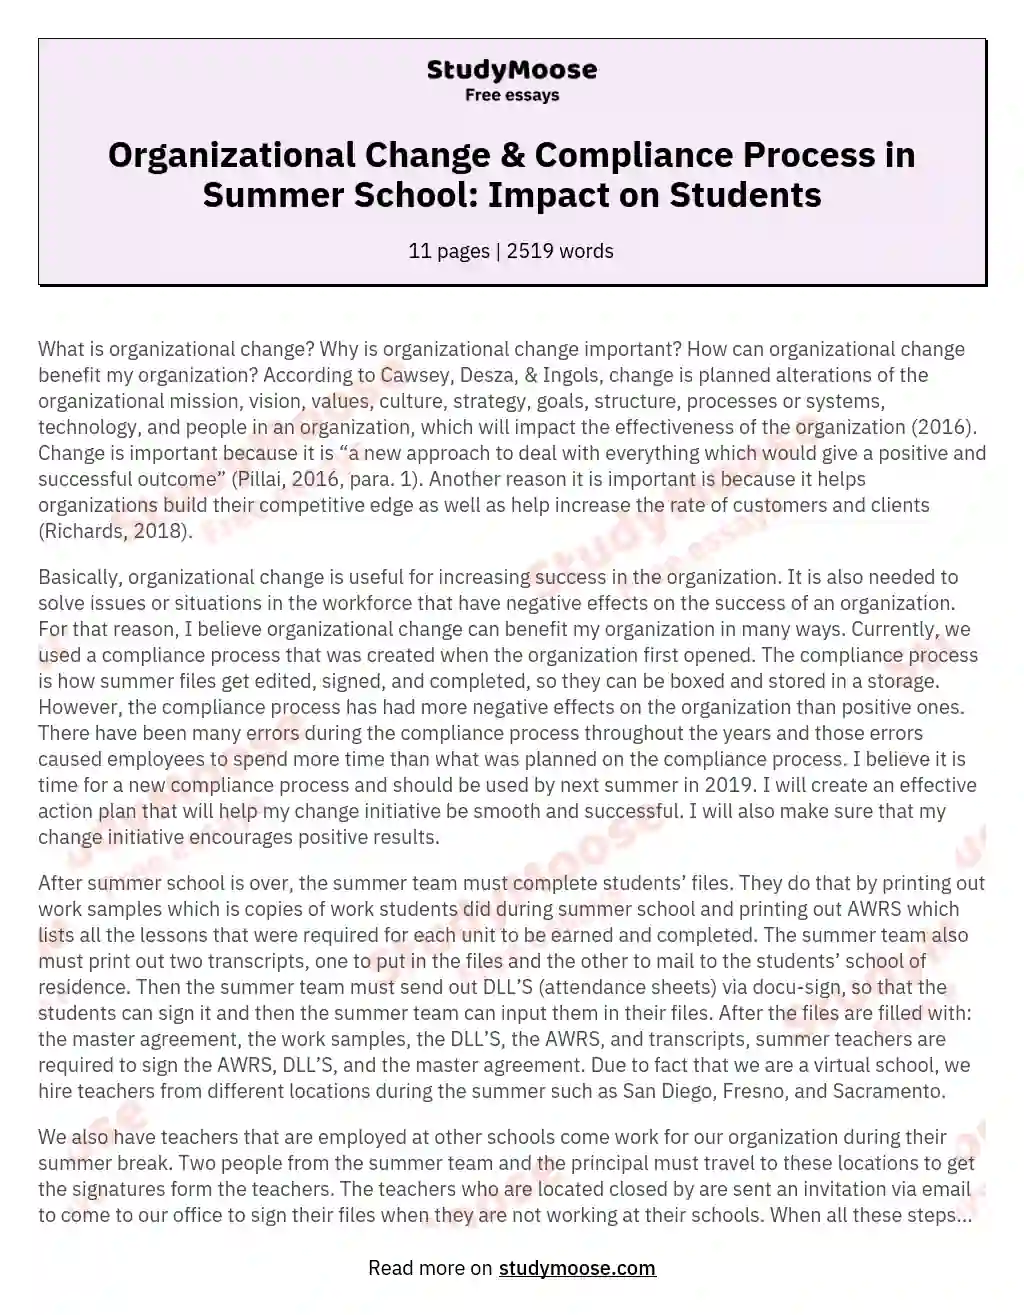 Organizational Change & Compliance Process in Summer School: Impact on Students essay